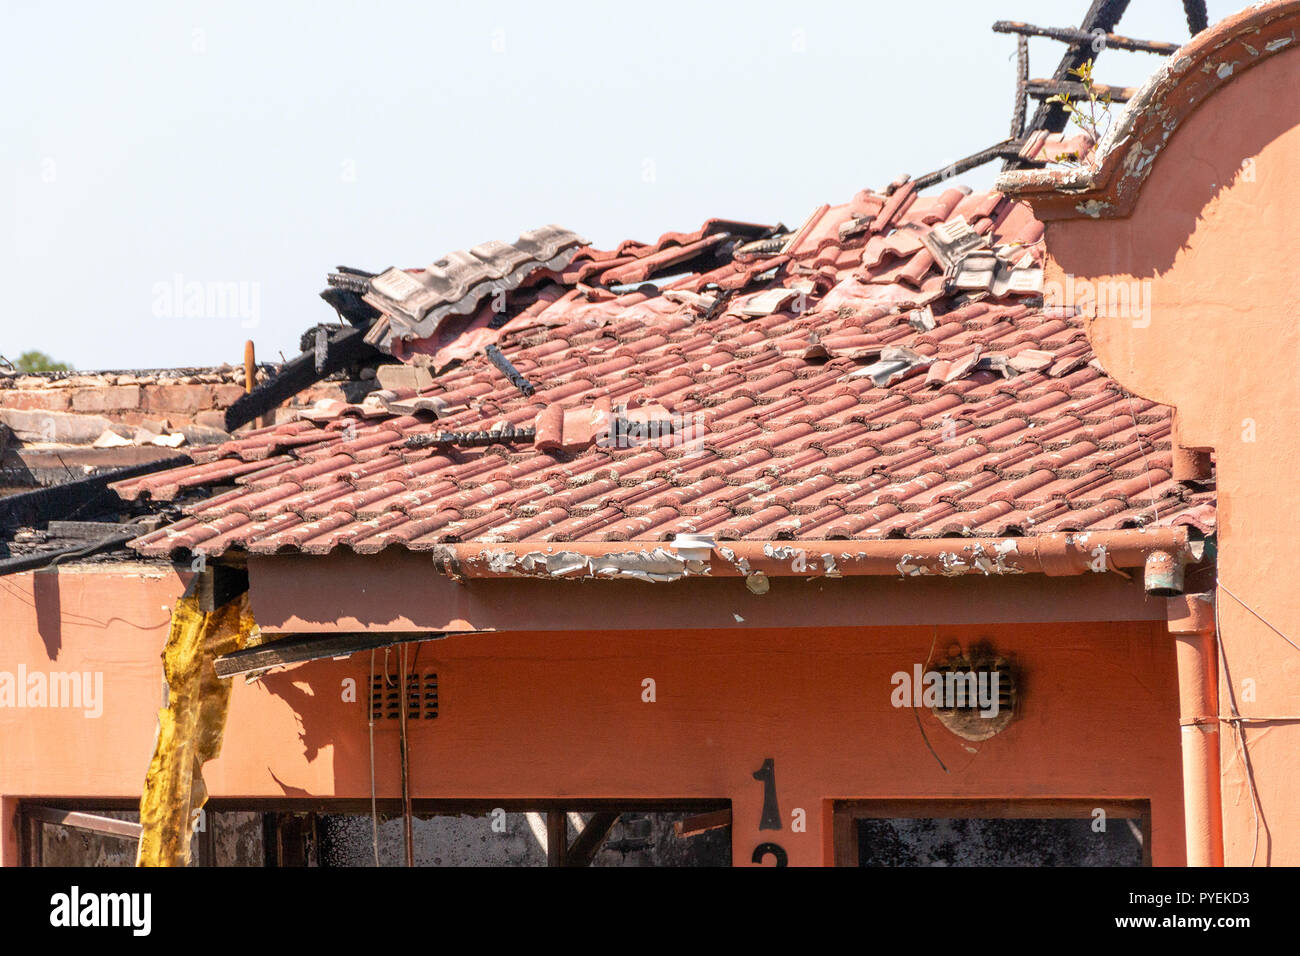 A close up view of a front section of  the burned out shell of a house that caught on fire and was totally destroyed Stock Photo